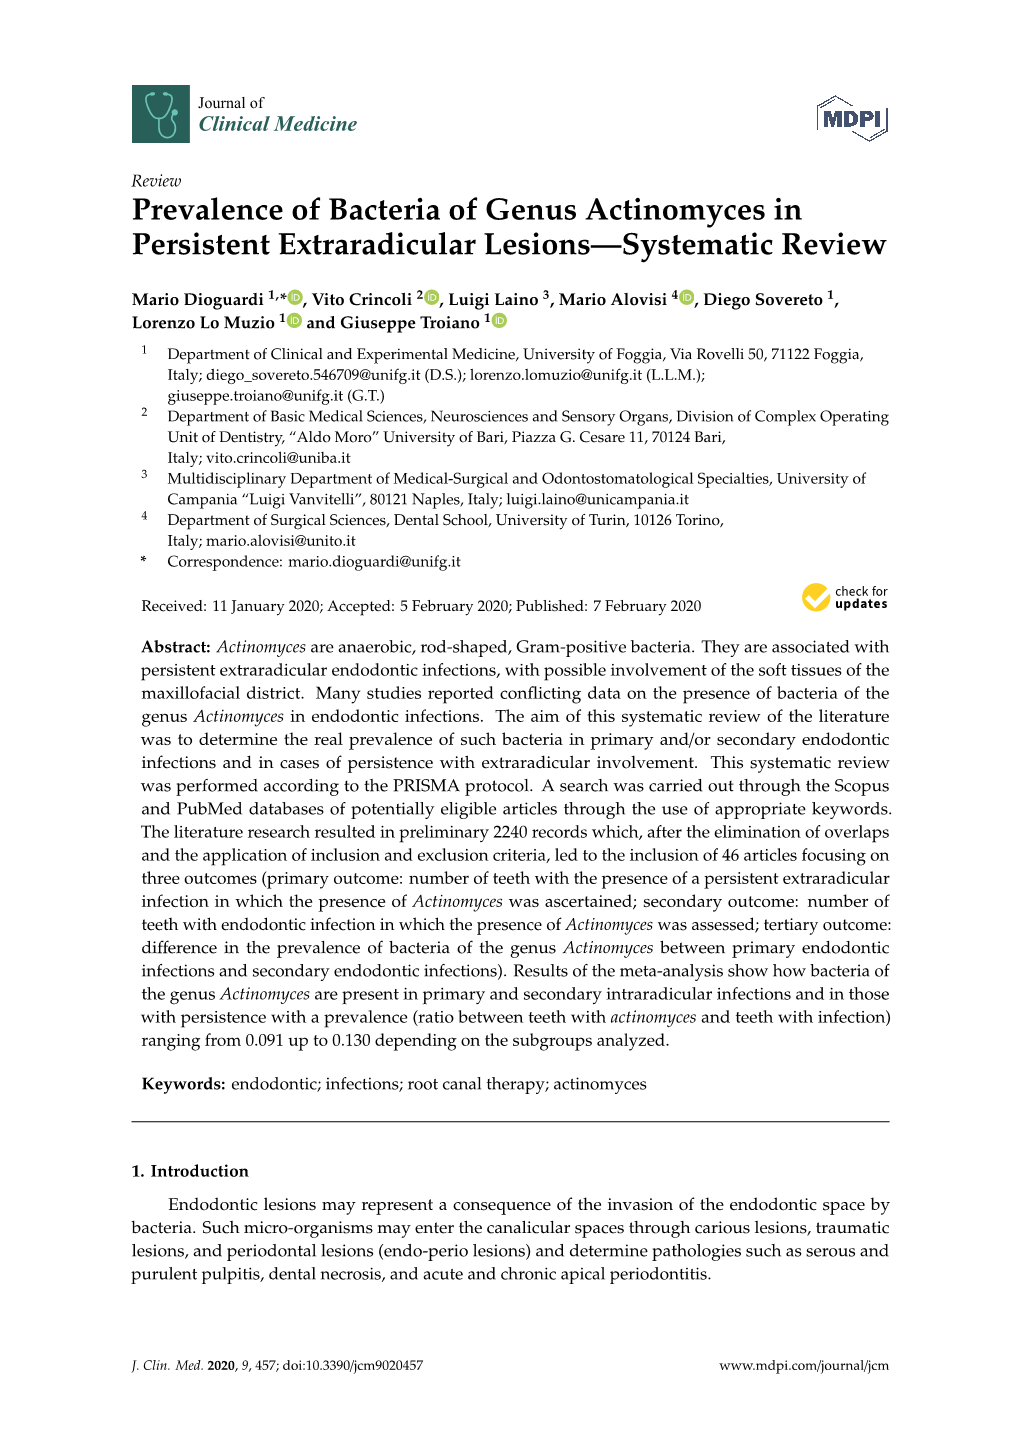 Prevalence of Bacteria of Genus Actinomyces in Persistent Extraradicular Lesions—Systematic Review